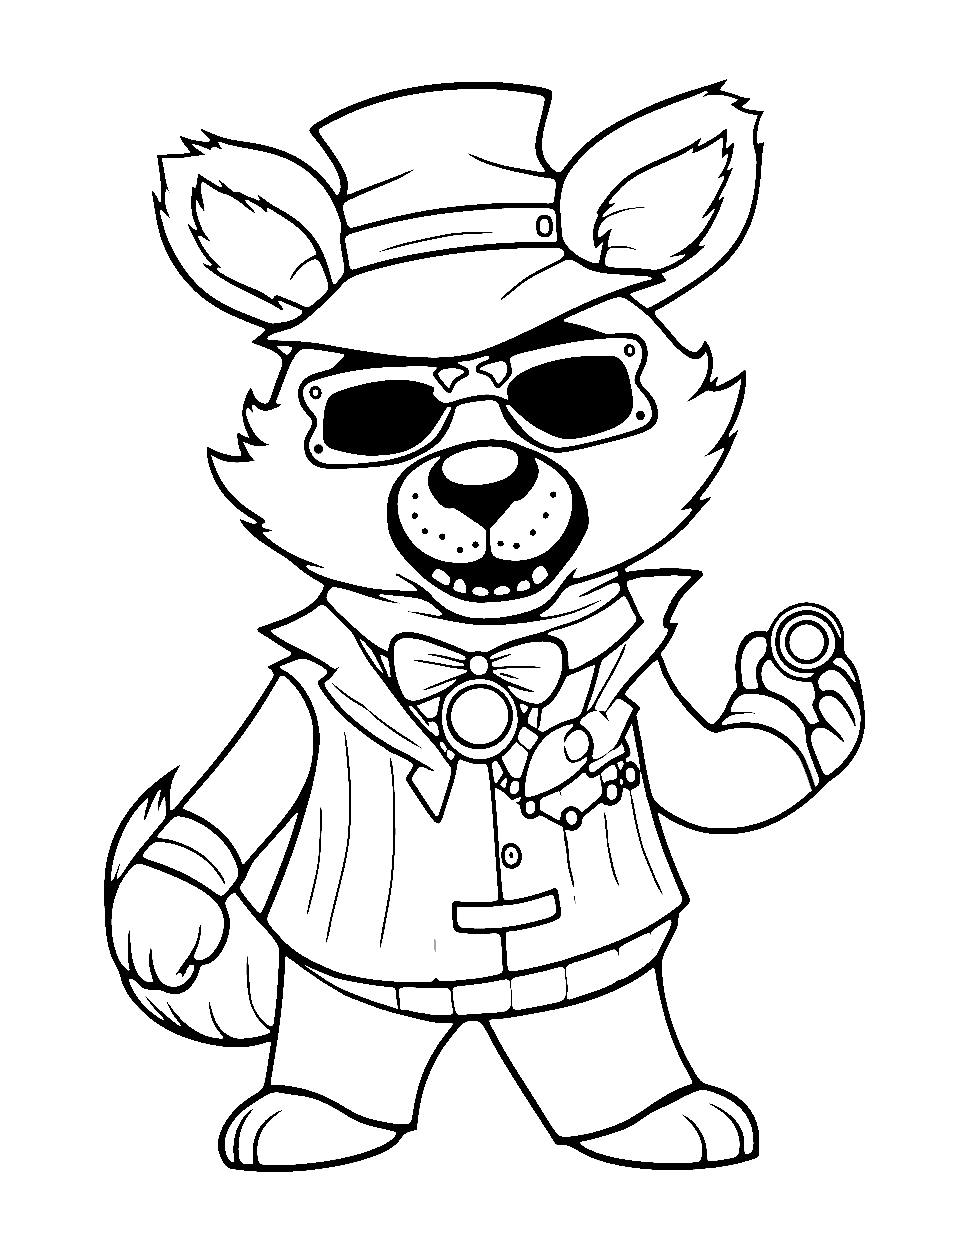 Various Five Nights At Freddy's Coloring Pages PDF To Your Kids